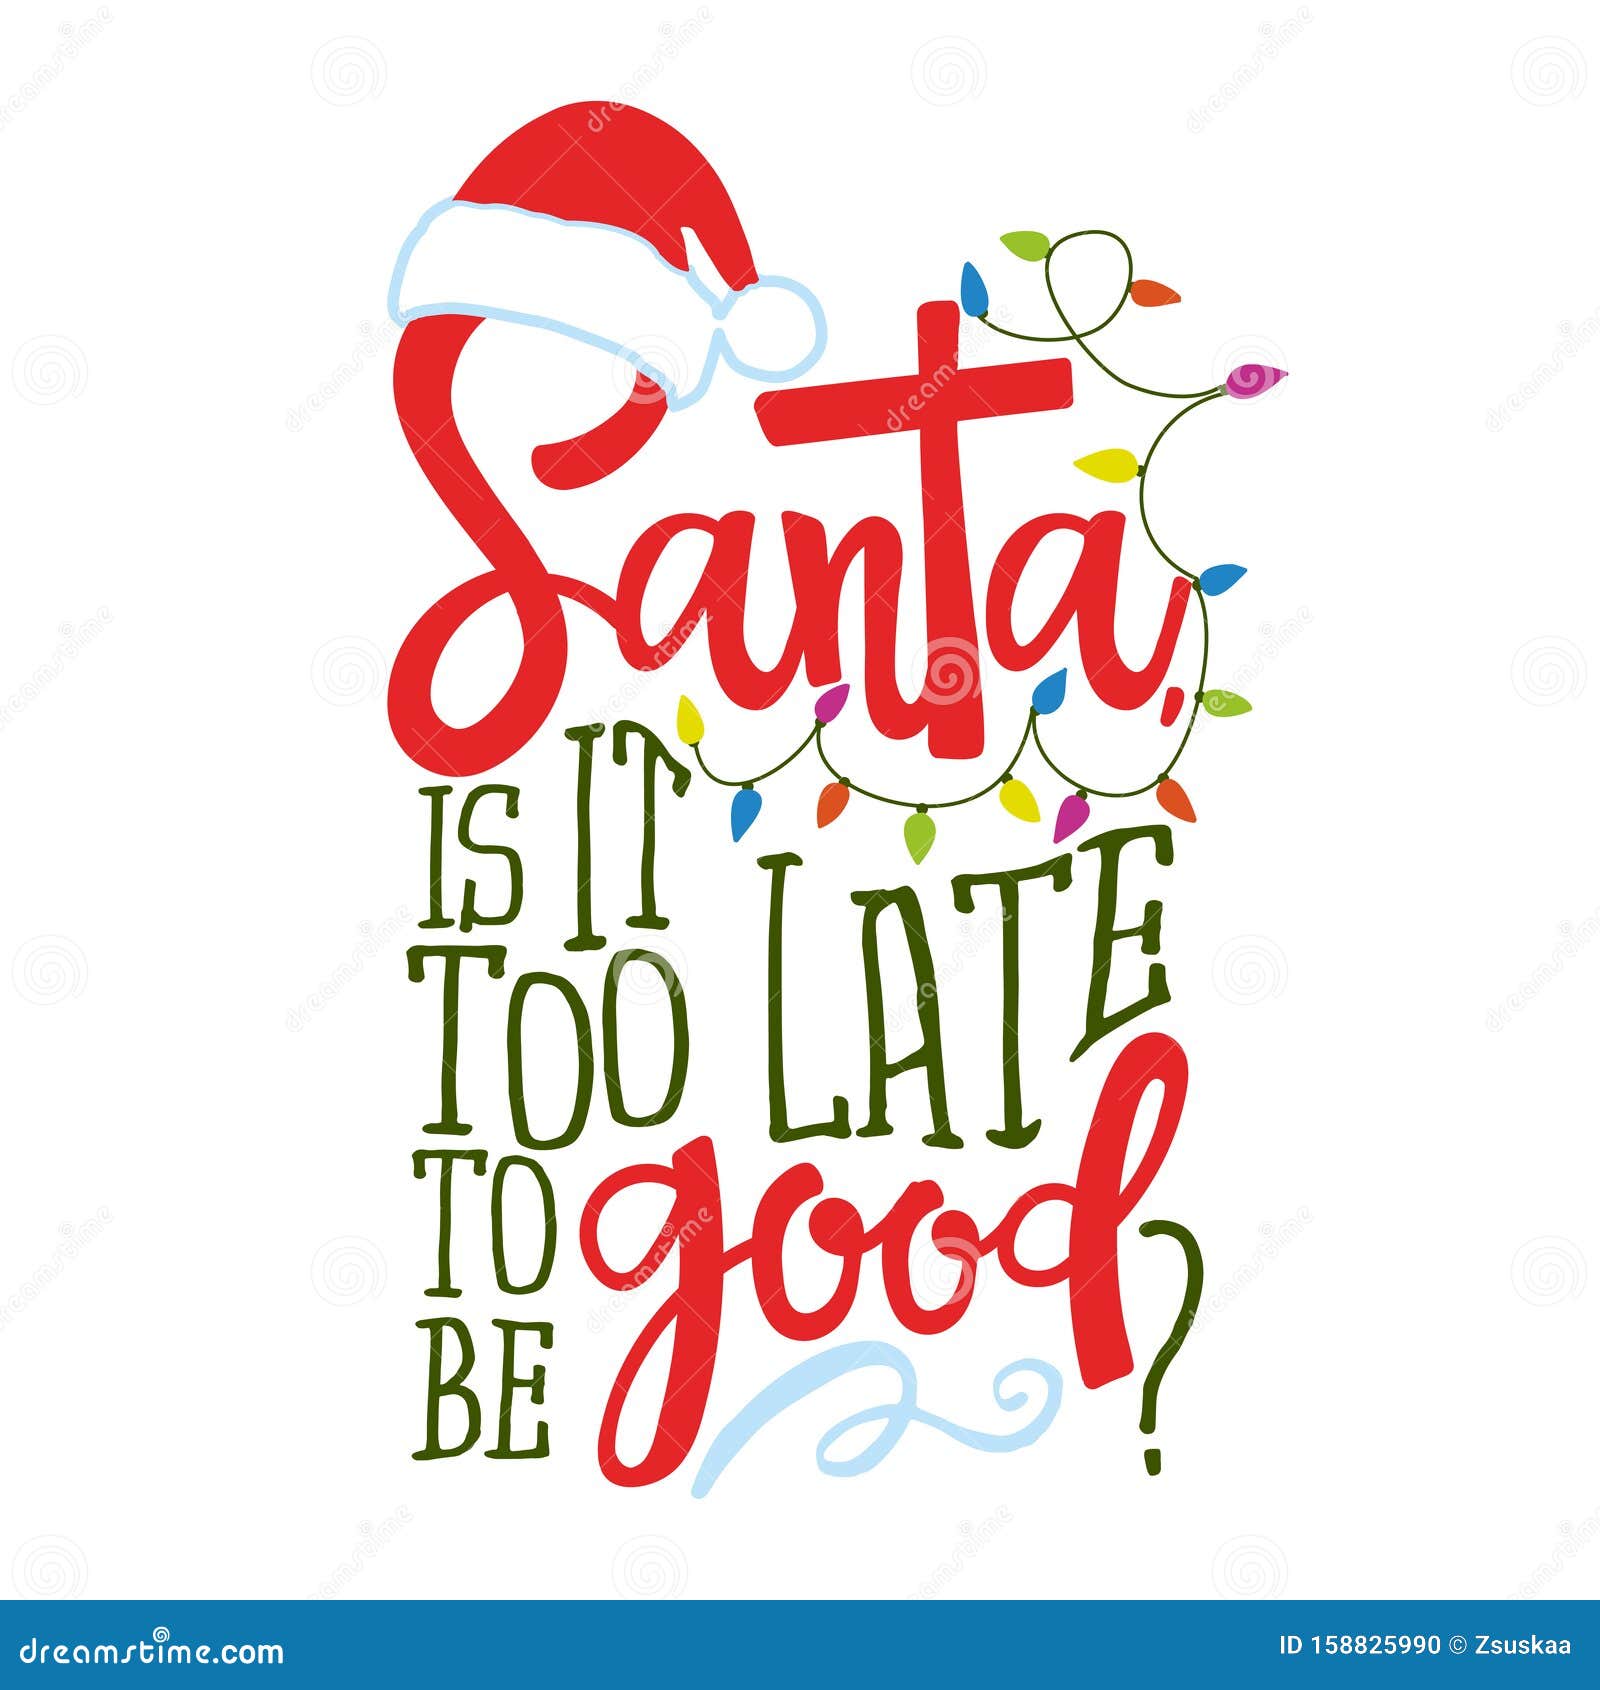 santa, it is too late to be good? - calligraphy phrase for christmas.